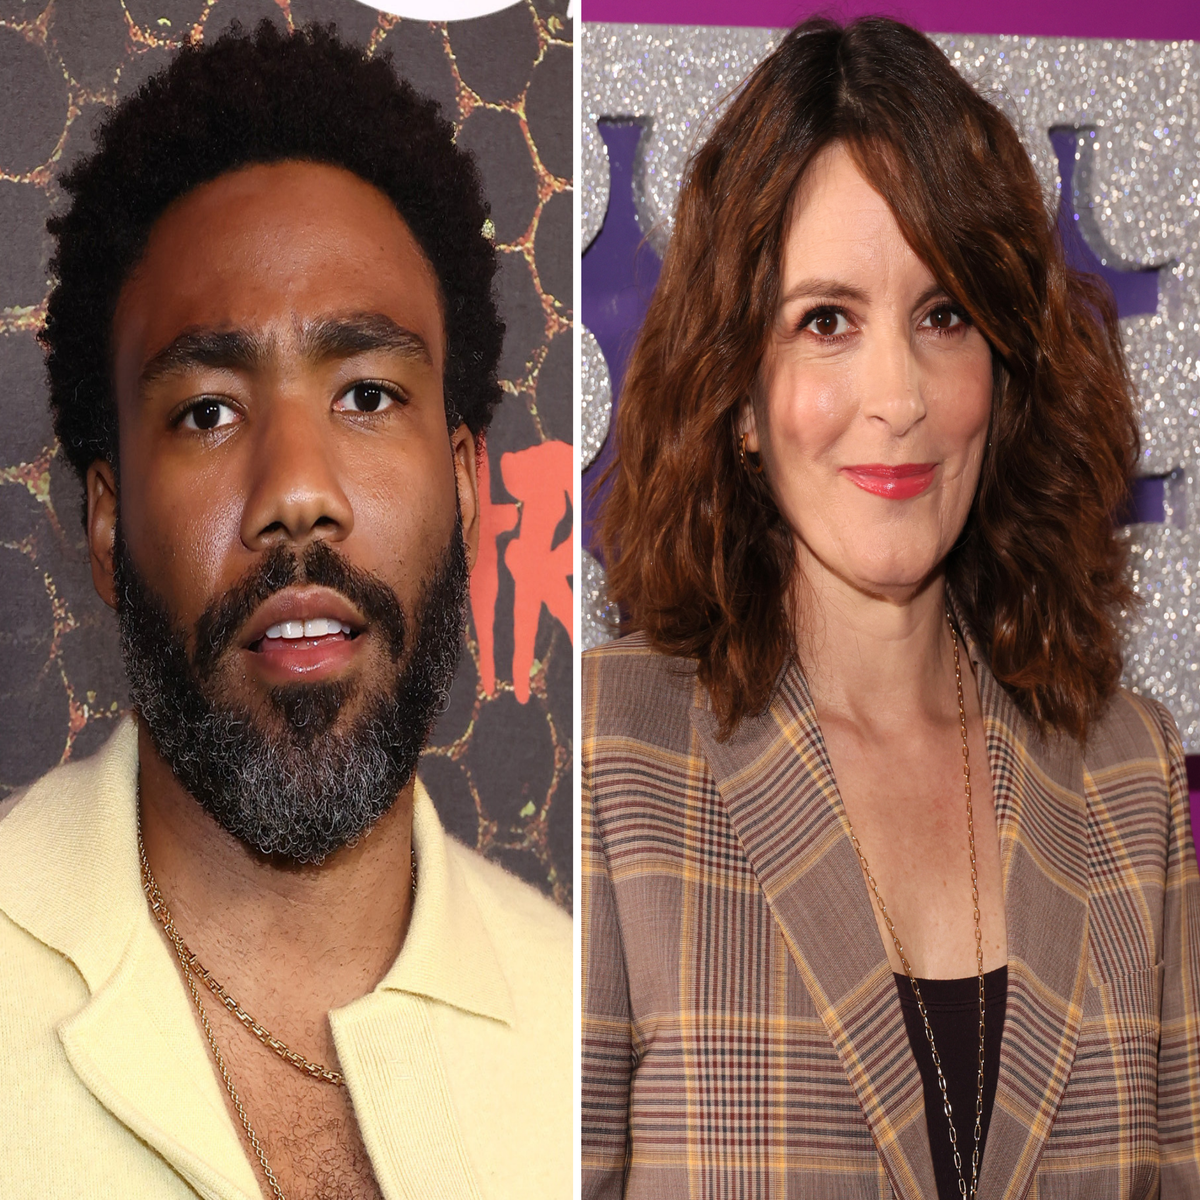 Tina Fey 'told Donald Glover he was a diversity hire', 30 Rock writer  claims | The Independent